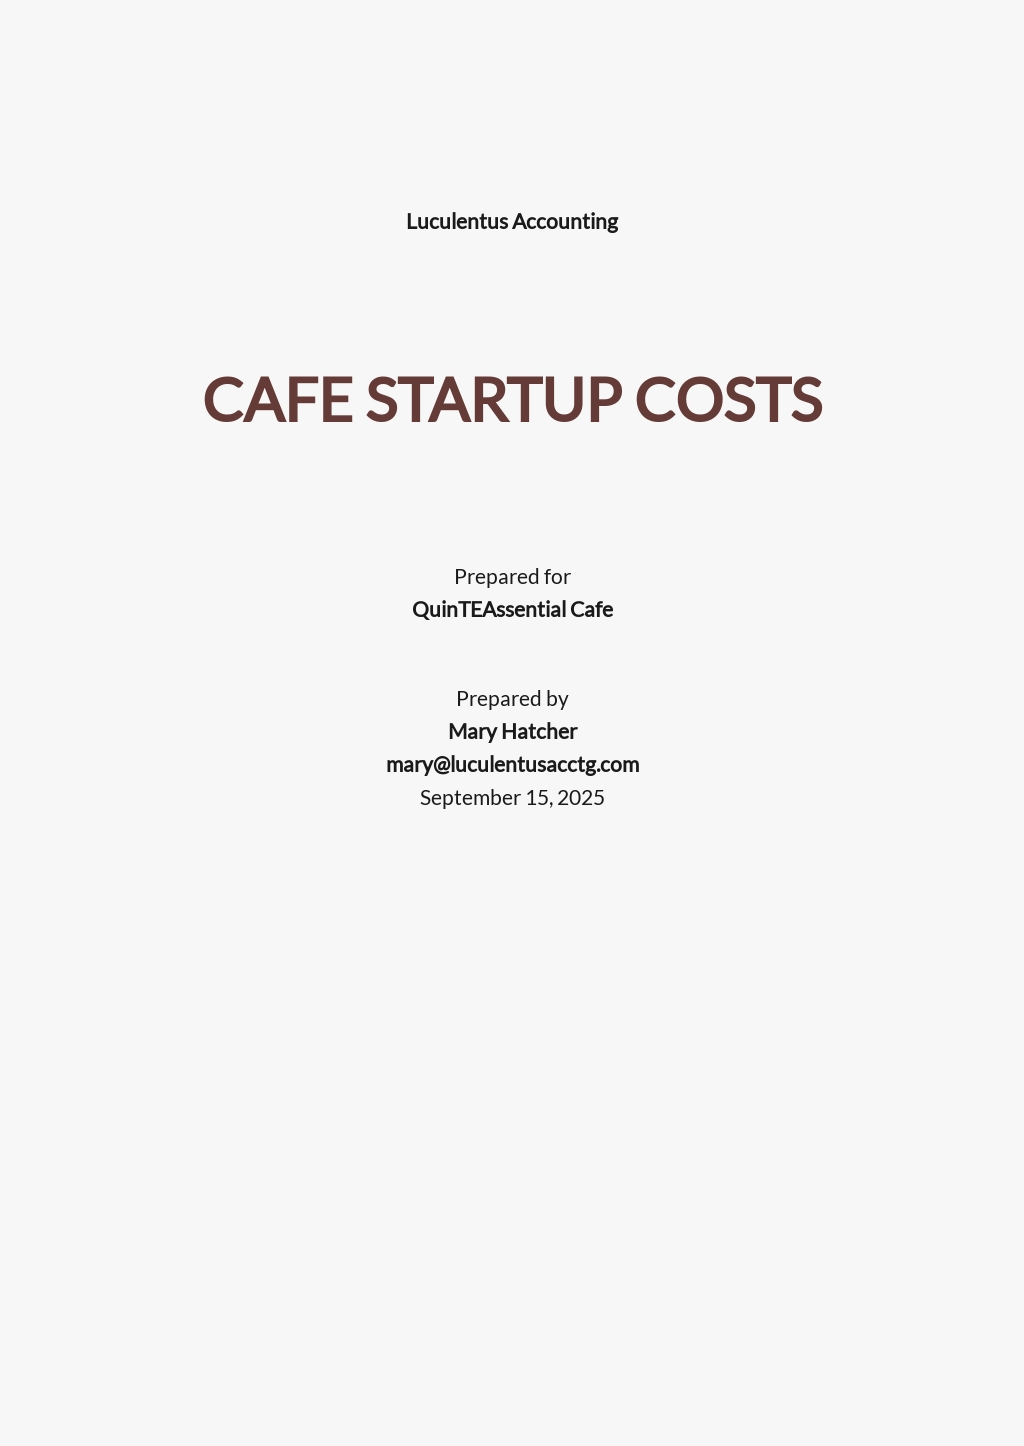 Cafe Startup Costs Template.jpe